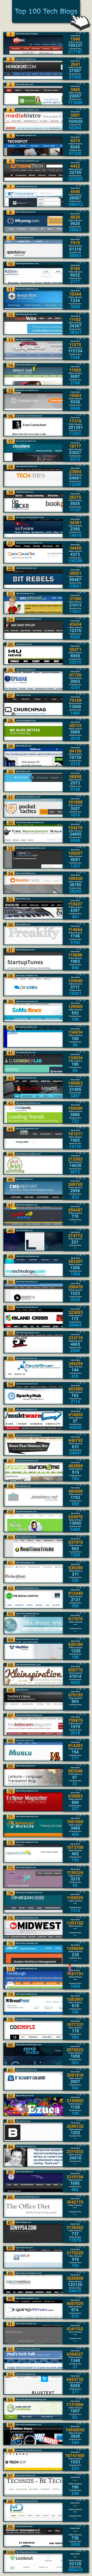 Top 100 Technology Blogs [Infographic]